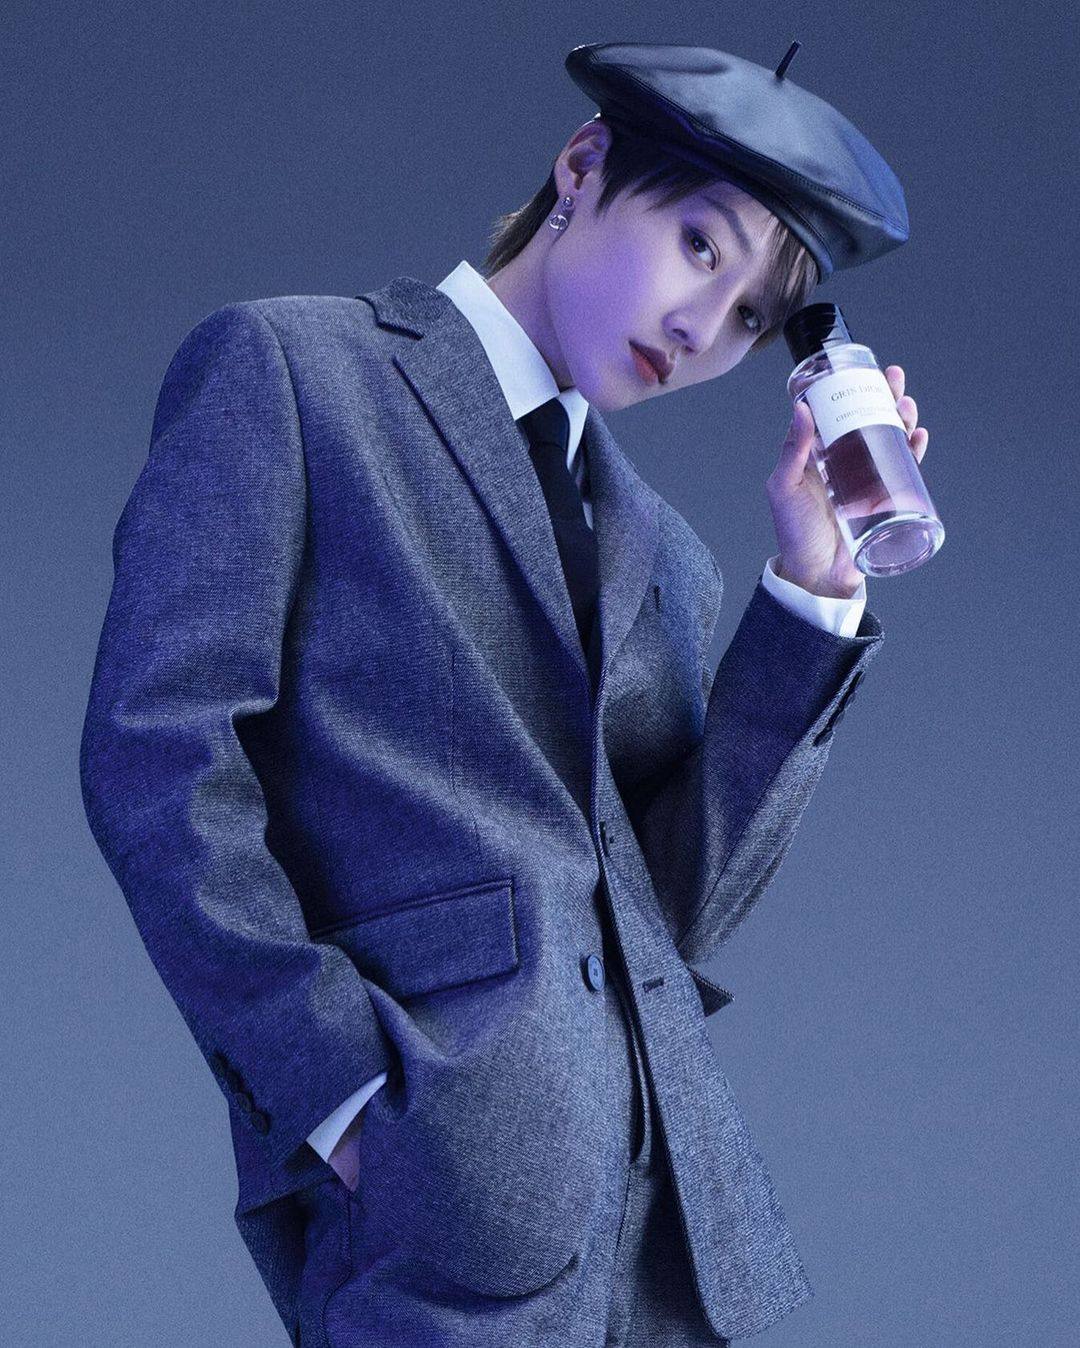 Chinese superstar Xin Liu is the new face of the Gris Dior eau de parfum campaign. Photo: @lyx0420/Instagram